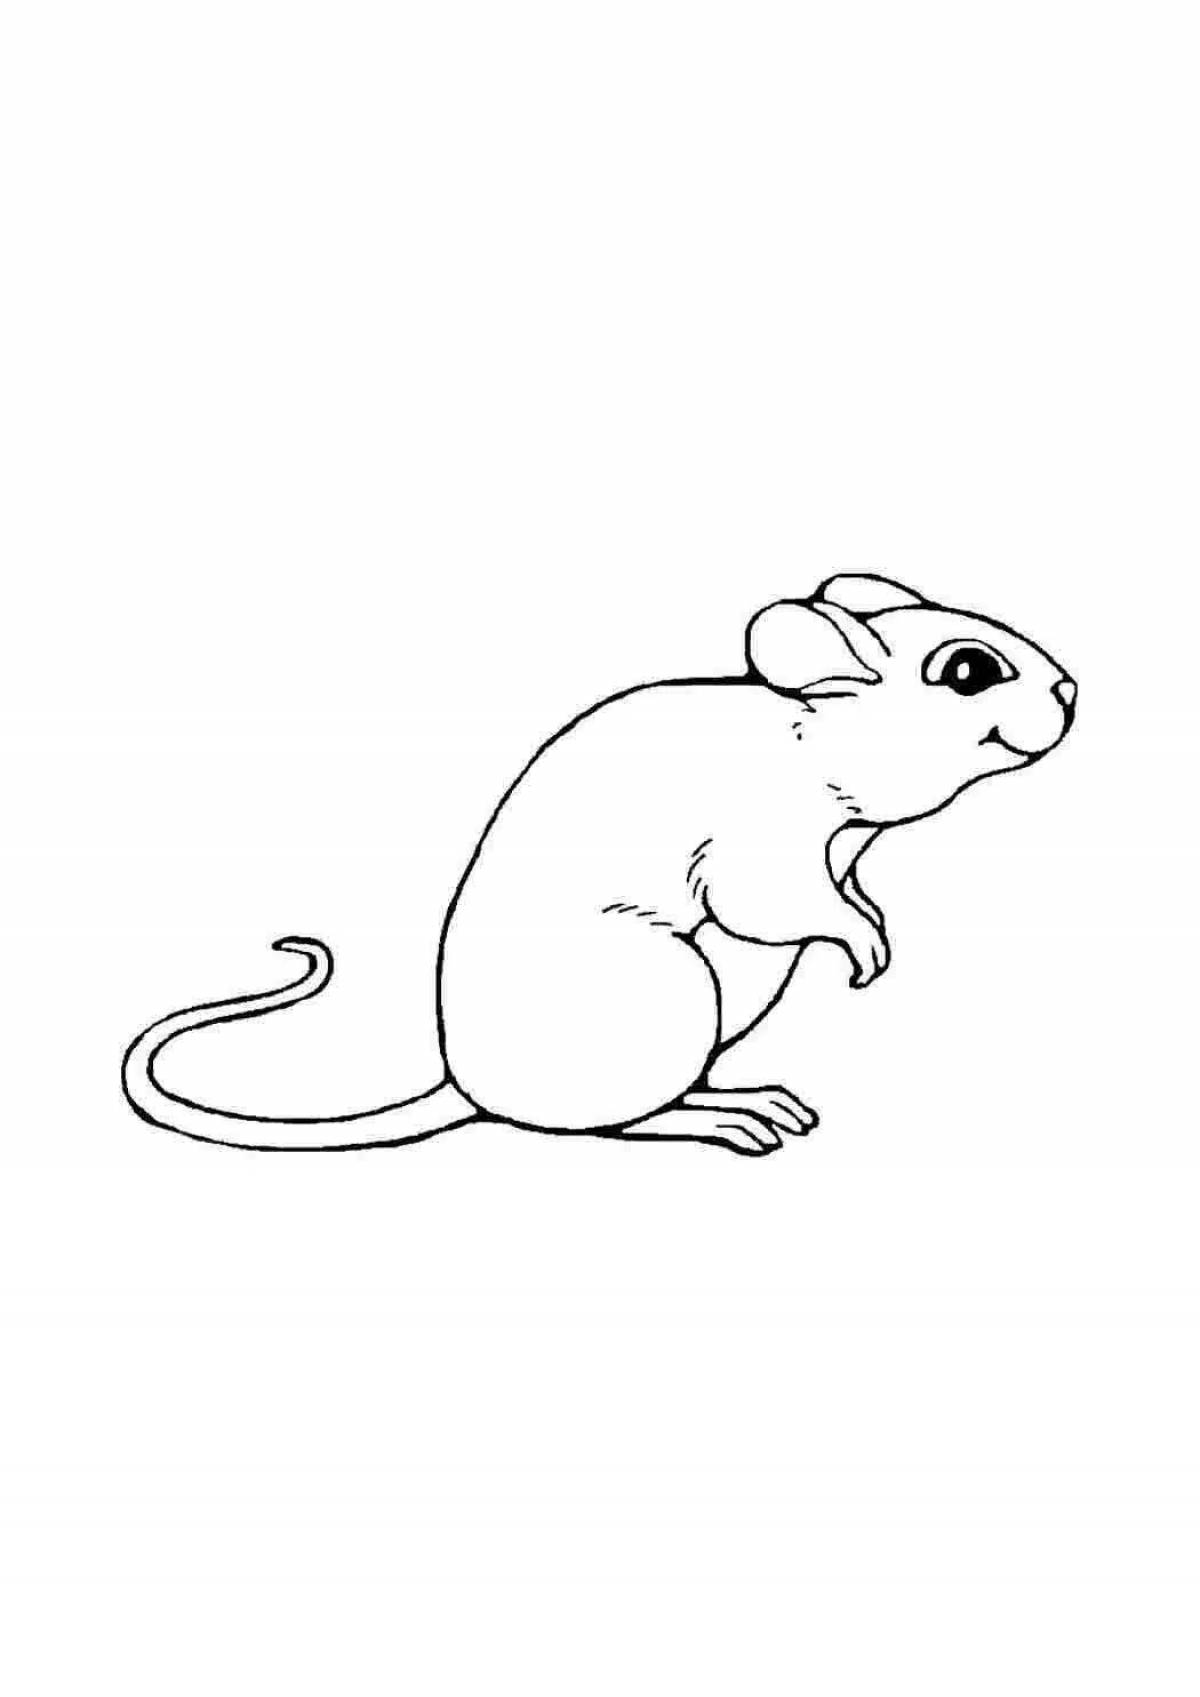 Vibrant harvest mouse coloring page